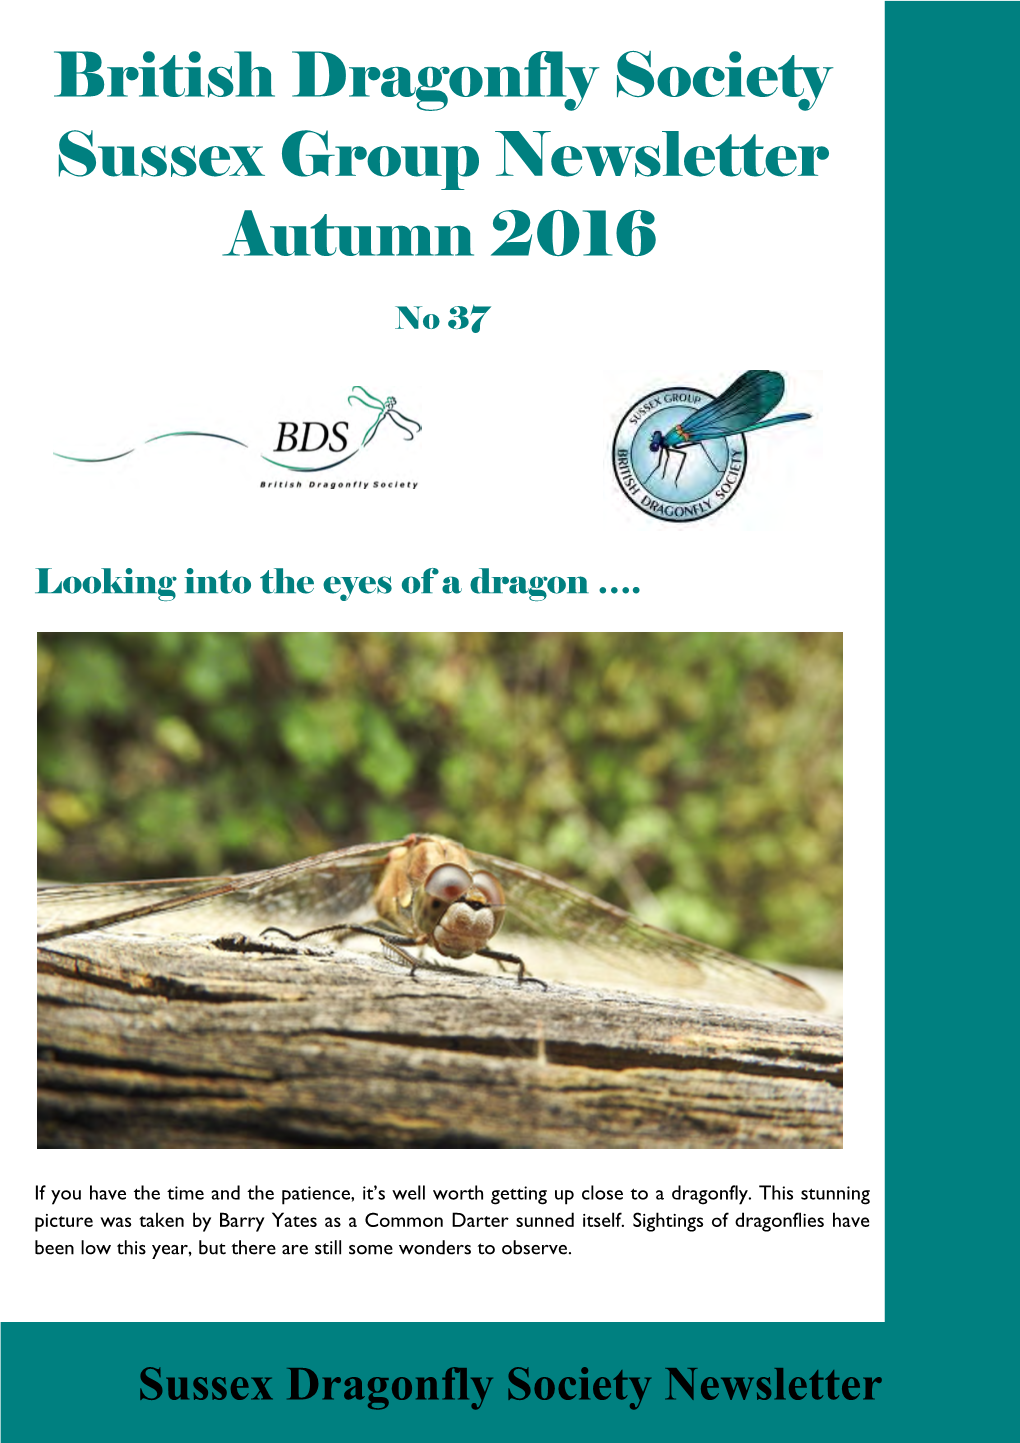 British Dragonfly Society Sussex Group Newsletter Autumn 2016